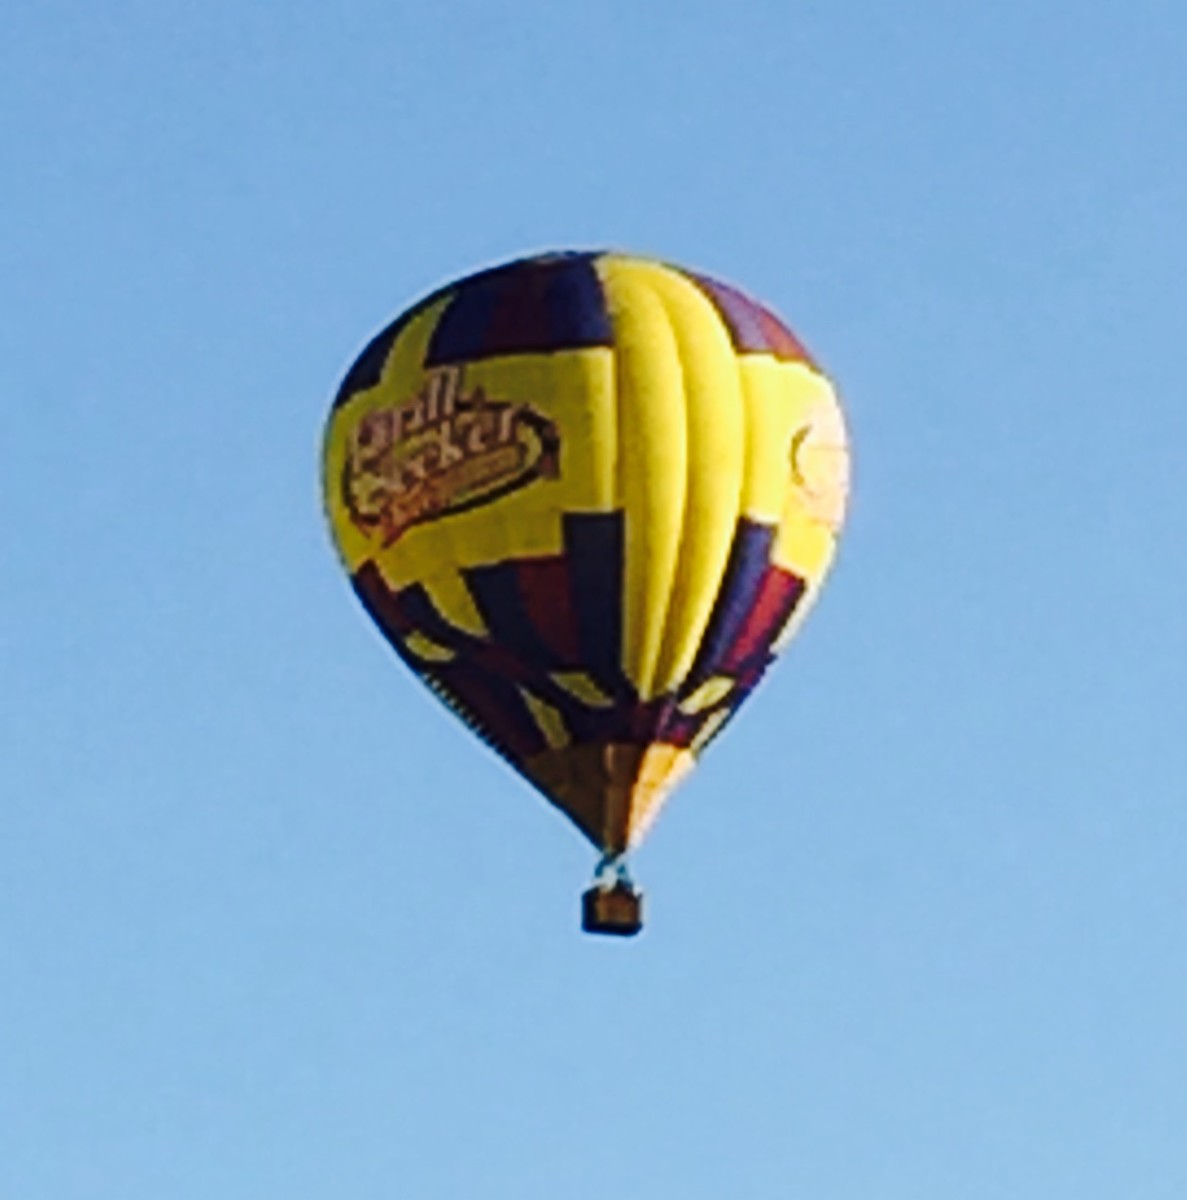 These Balloons floating over our campground near Orlando Florida are an example of the different things an RV owner will often see.